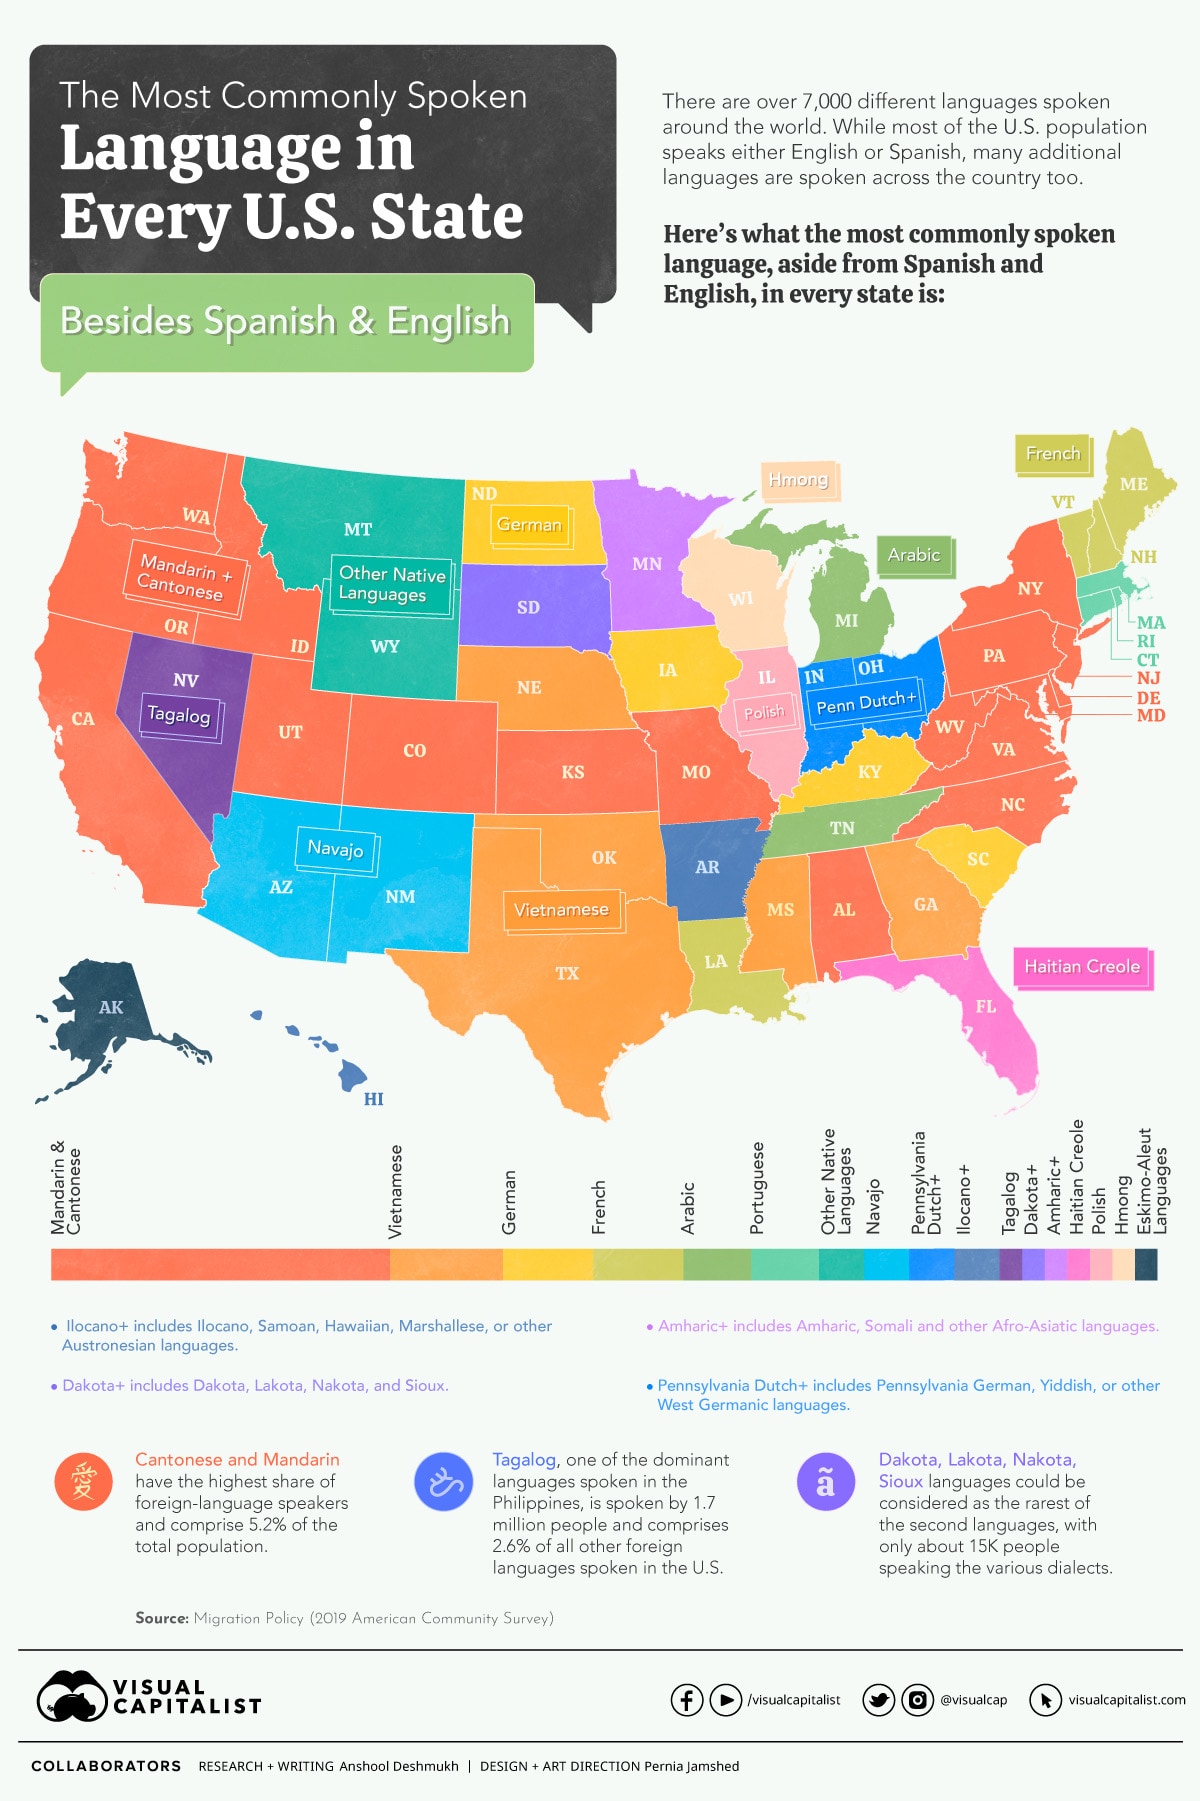 Most popular languages in the U.S., besides English and Spanish (infographic)